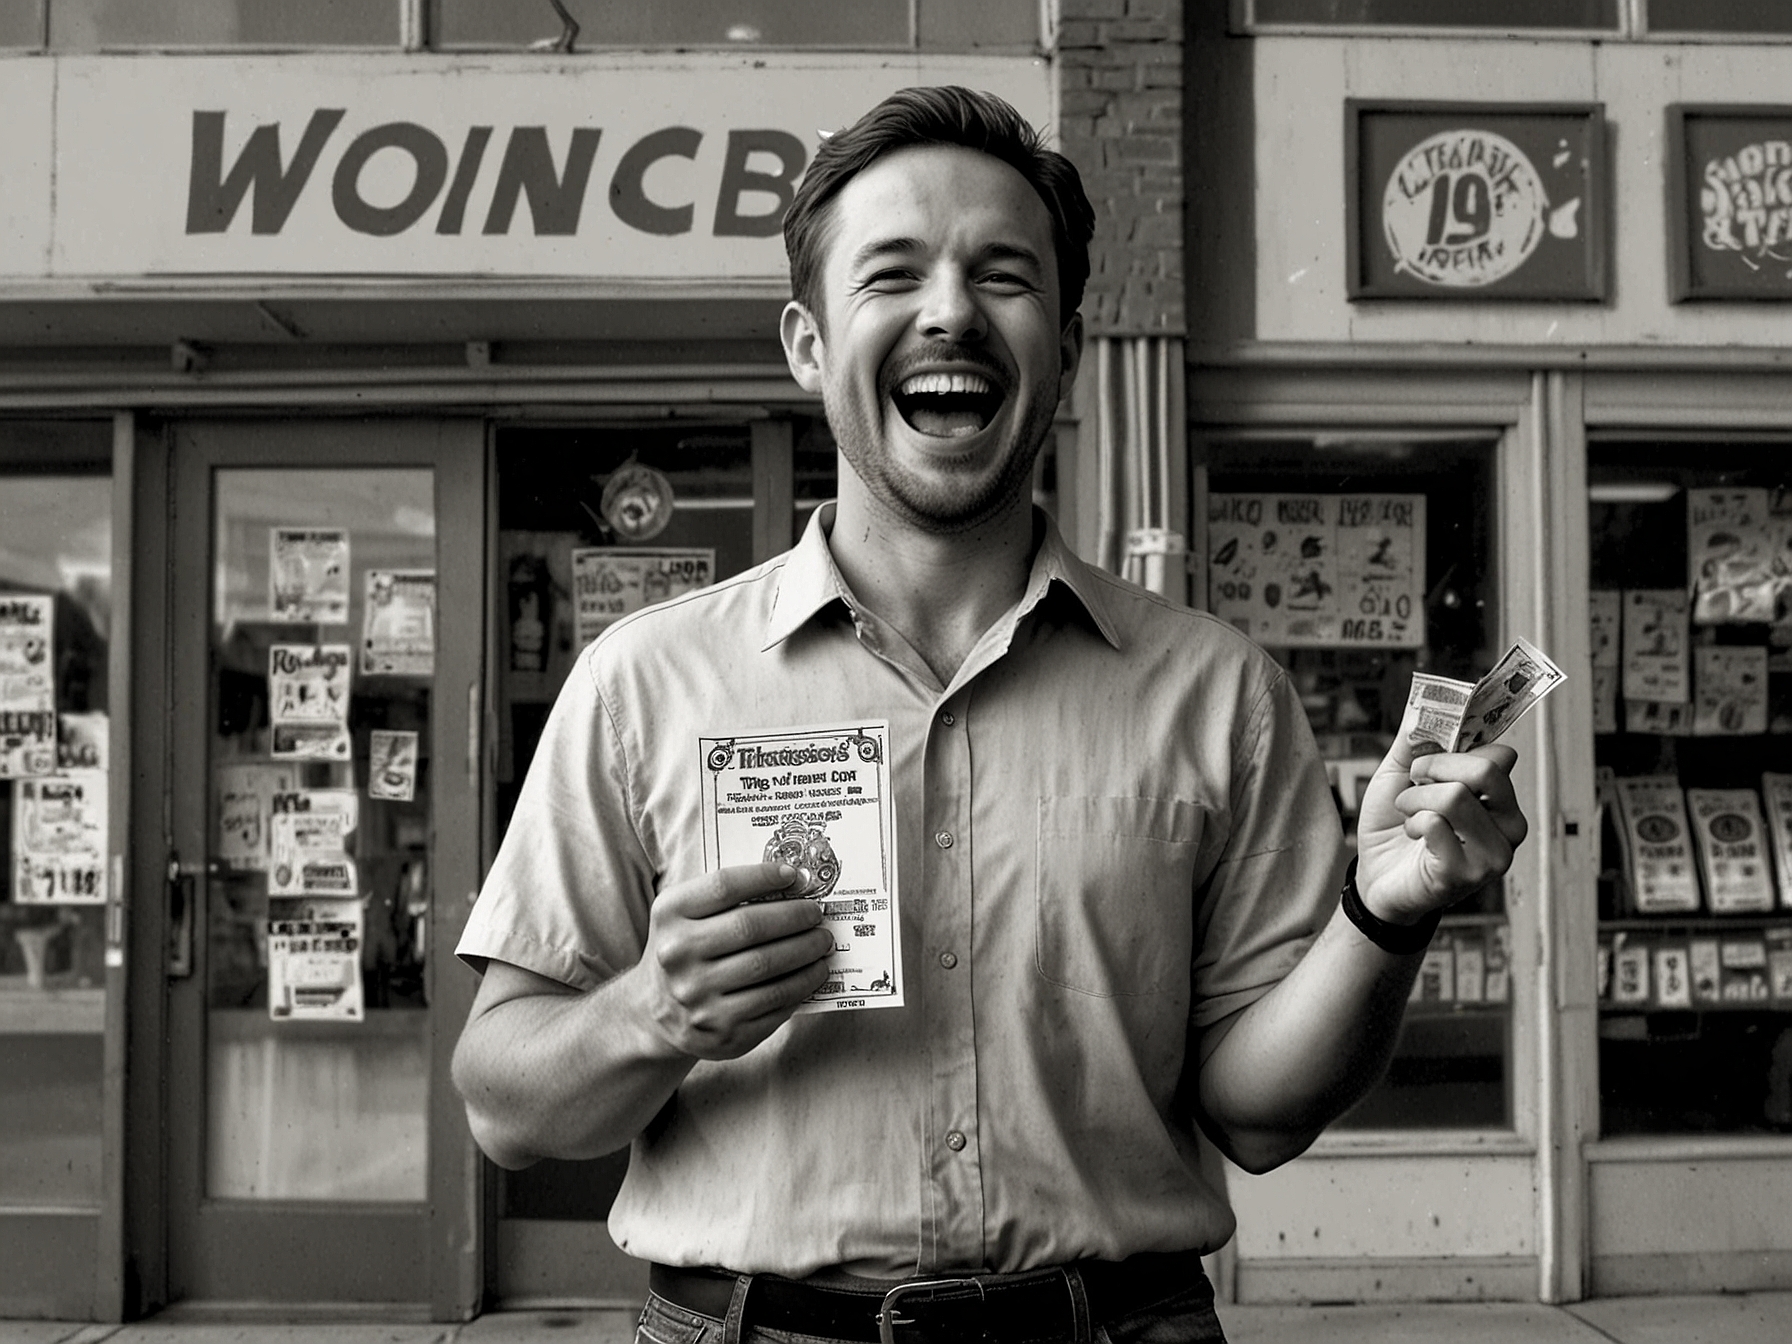 A jubilant man with a lottery ticket in hand stands outside a local convenience store, capturing the moment of his $1 million win that dramatically changed his life.